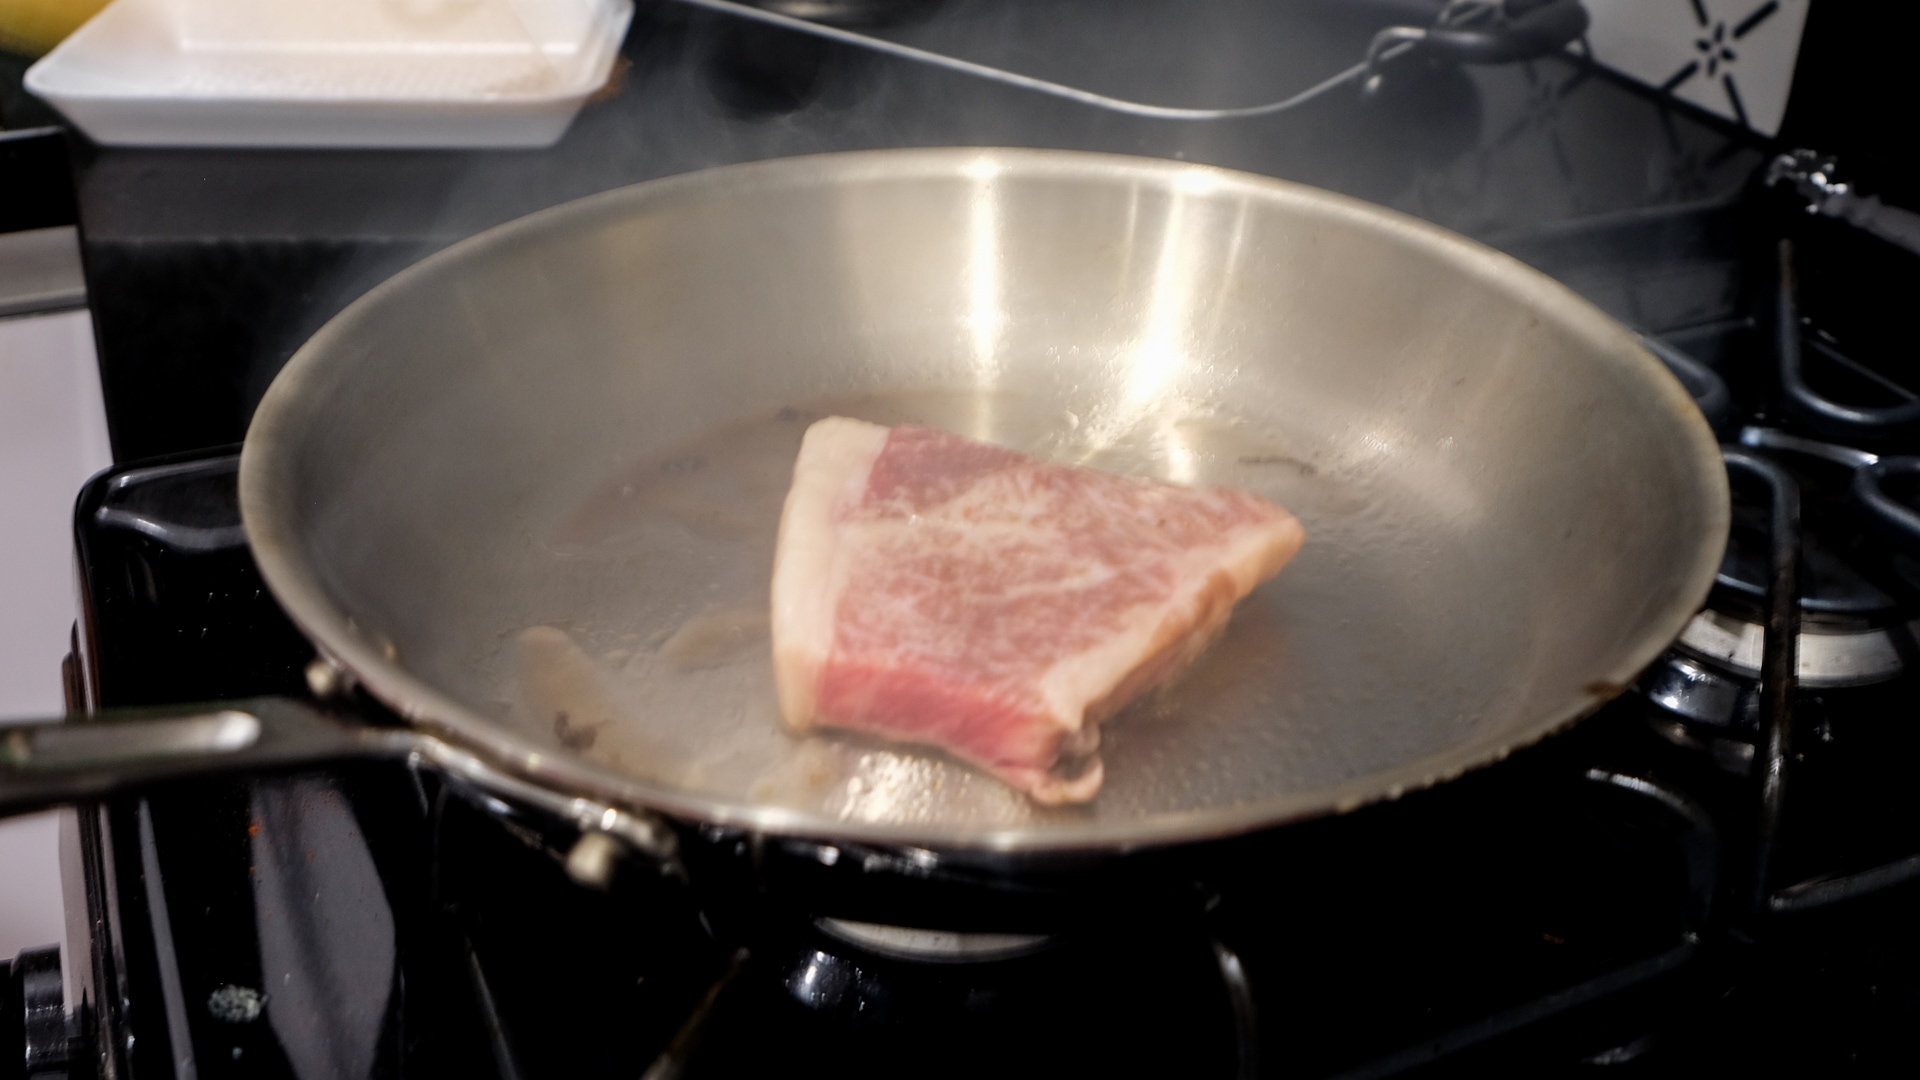 Searing the A5 in a skillet